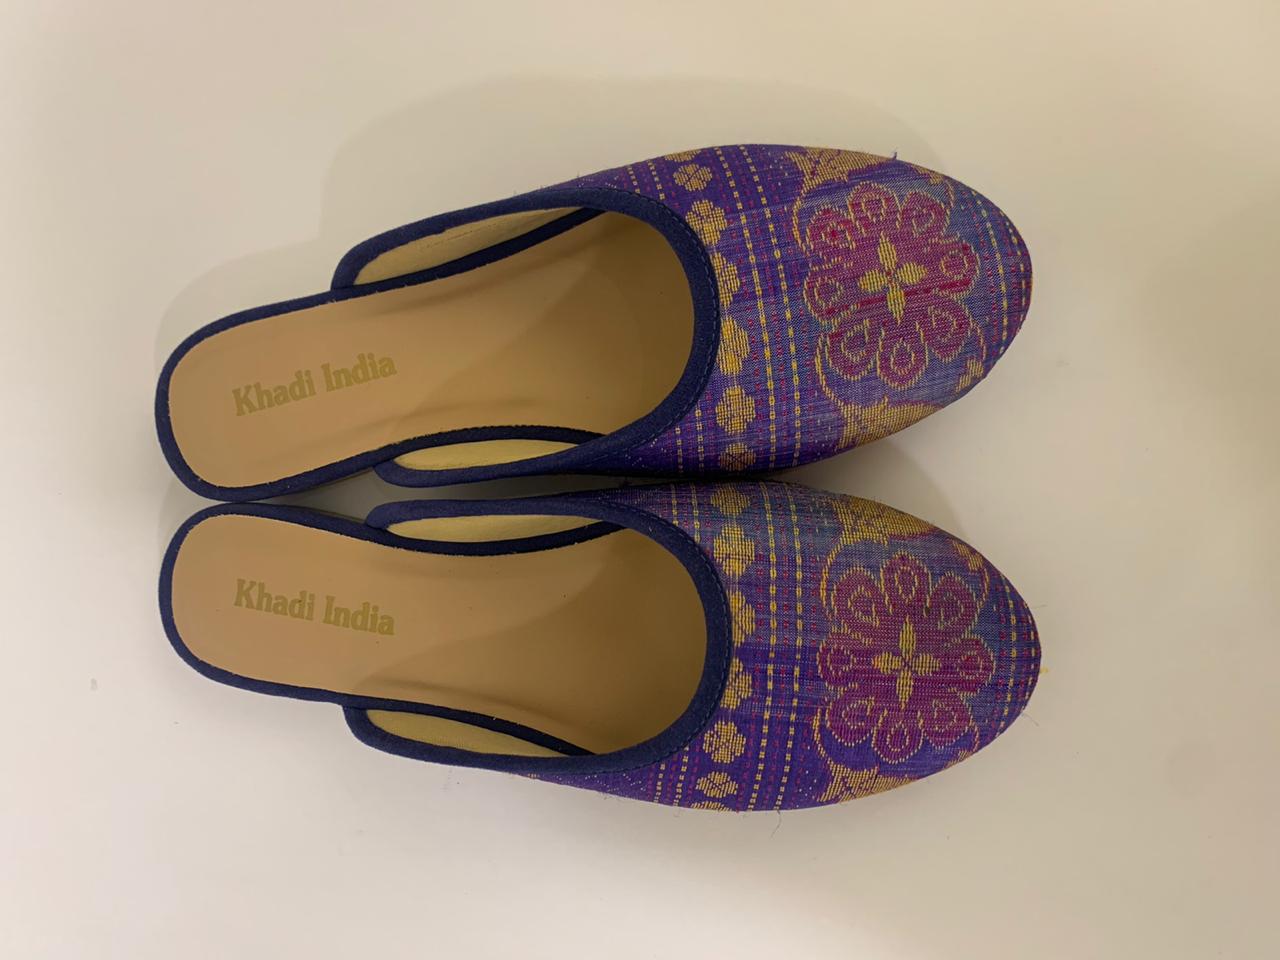 Agra shoe industry goes for khadi after 